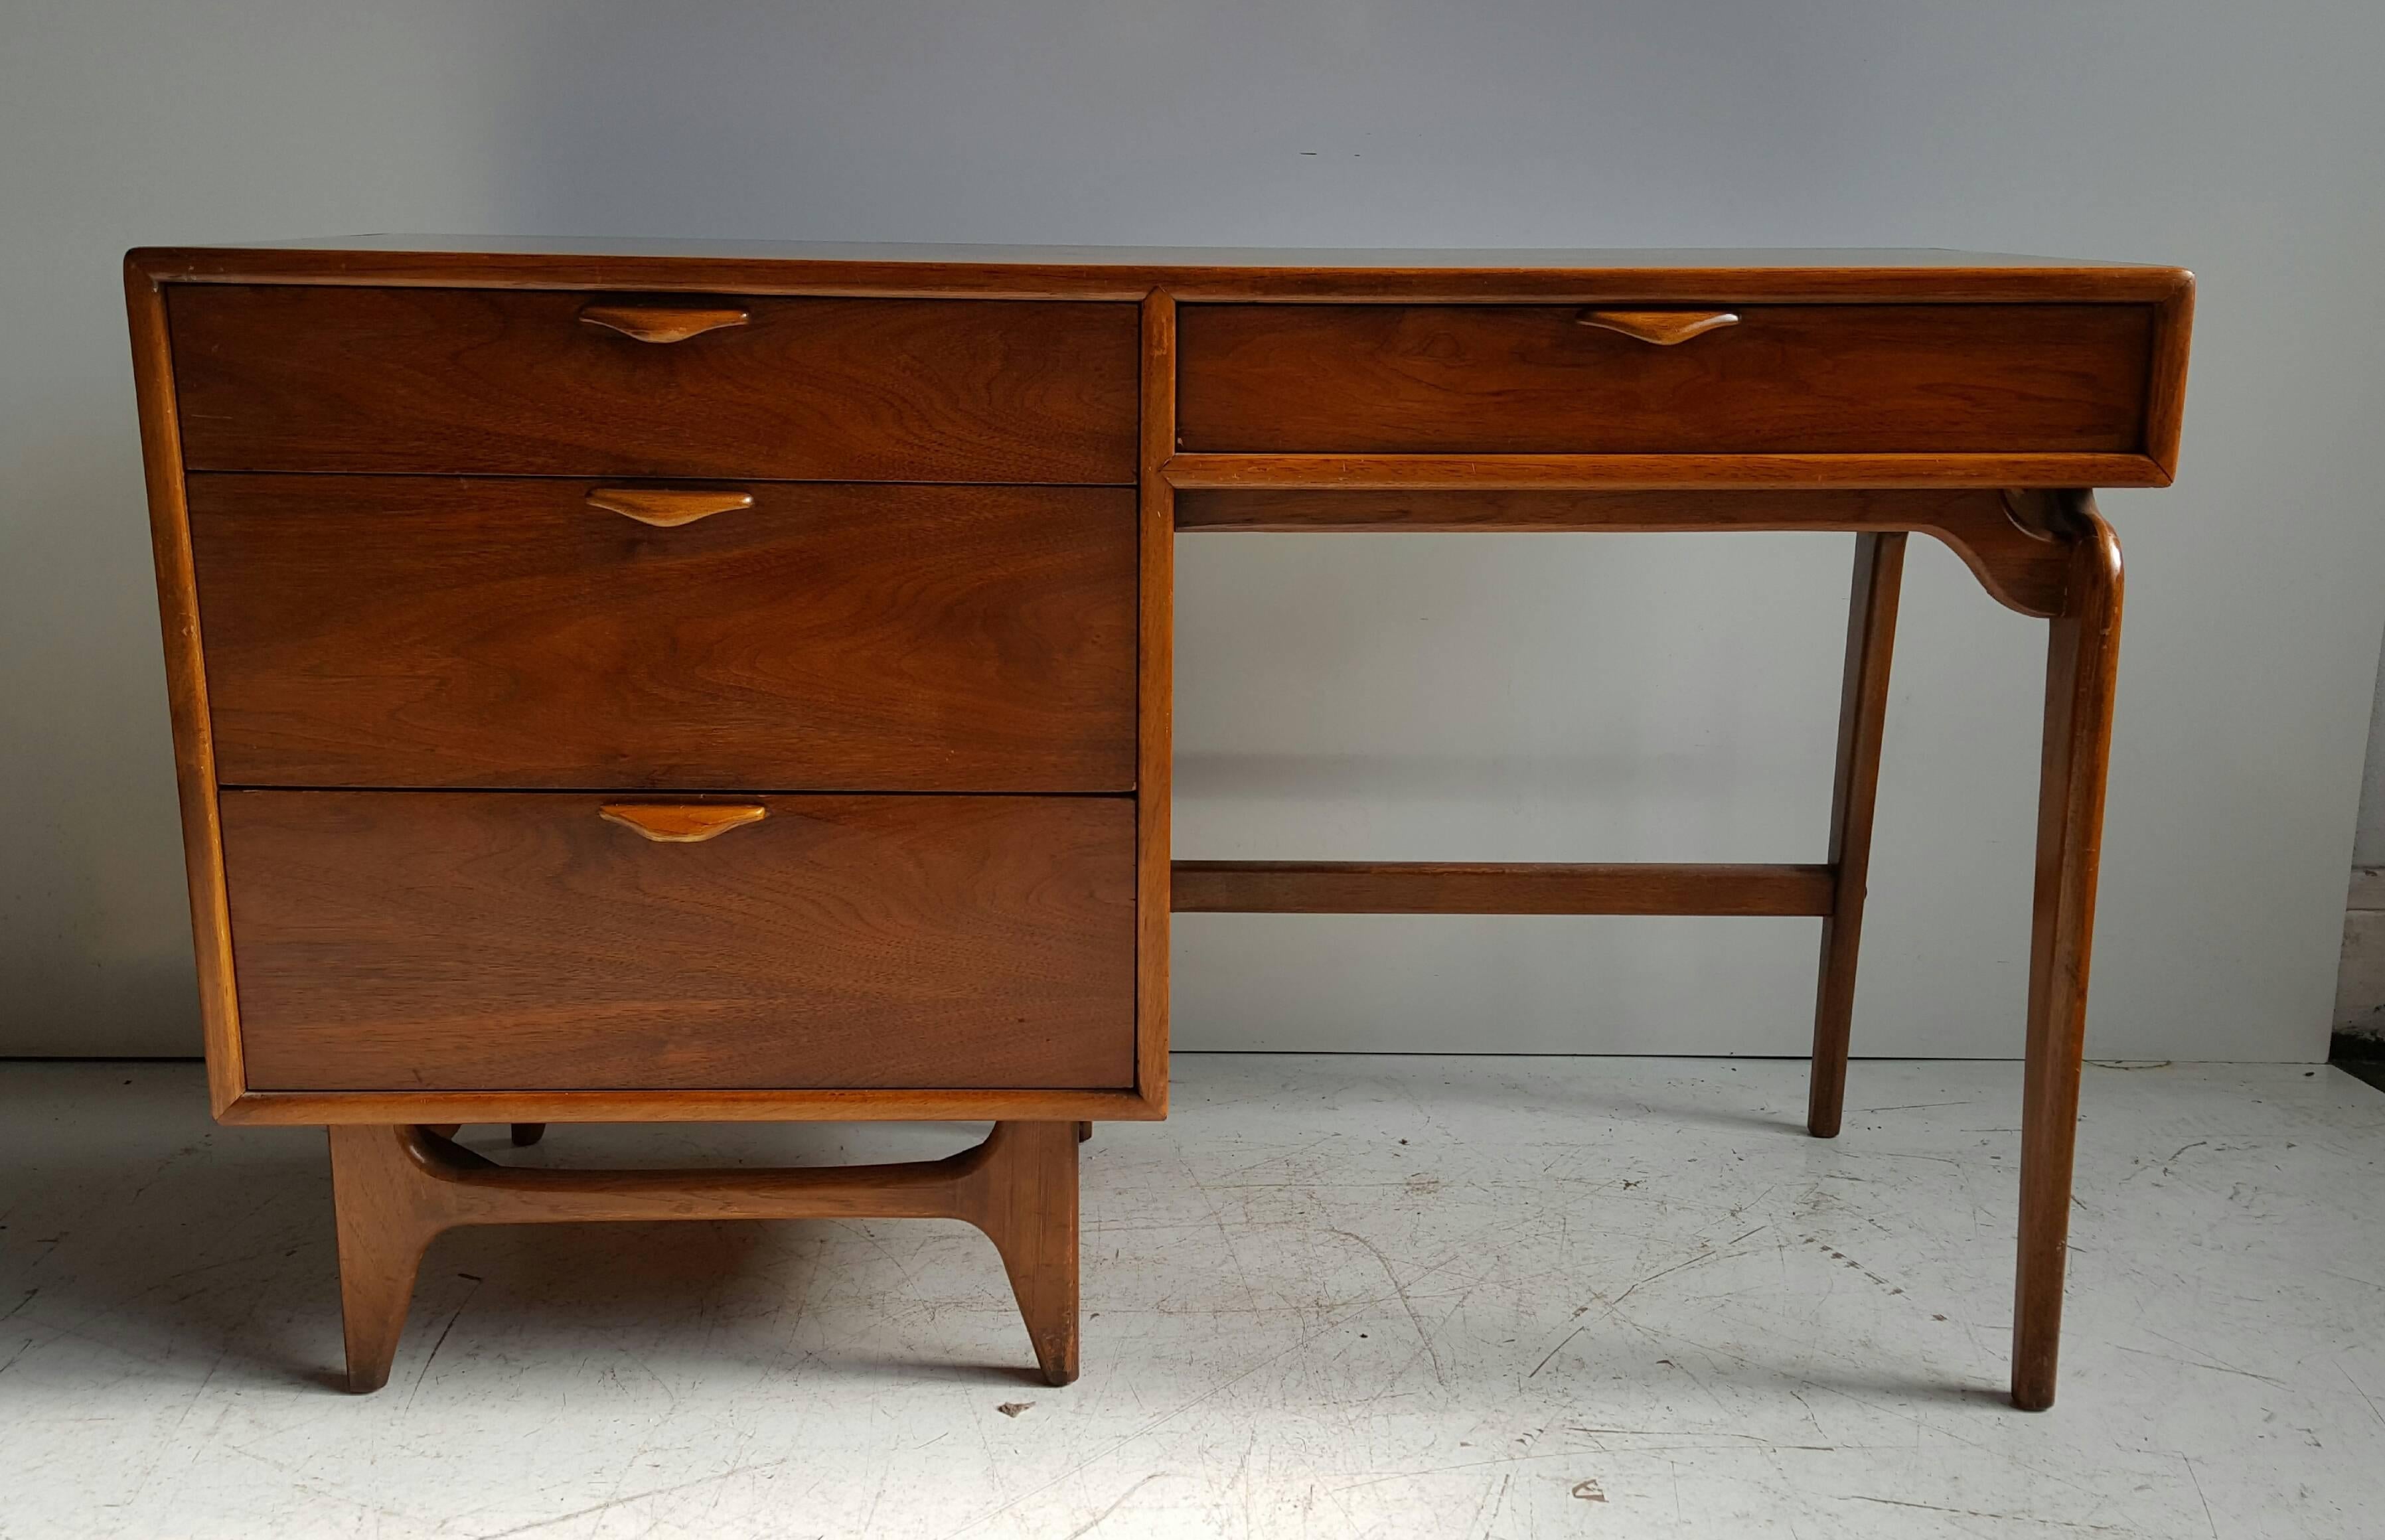 Modernist walnut desk, Andre Bus for Lane, Classic Mid-Century Modern design. Great quality as expected with Lane fine furniture, wonderful sculptural hand pulls, desk features four generious size drawers, beautiful warm walnut, retains original